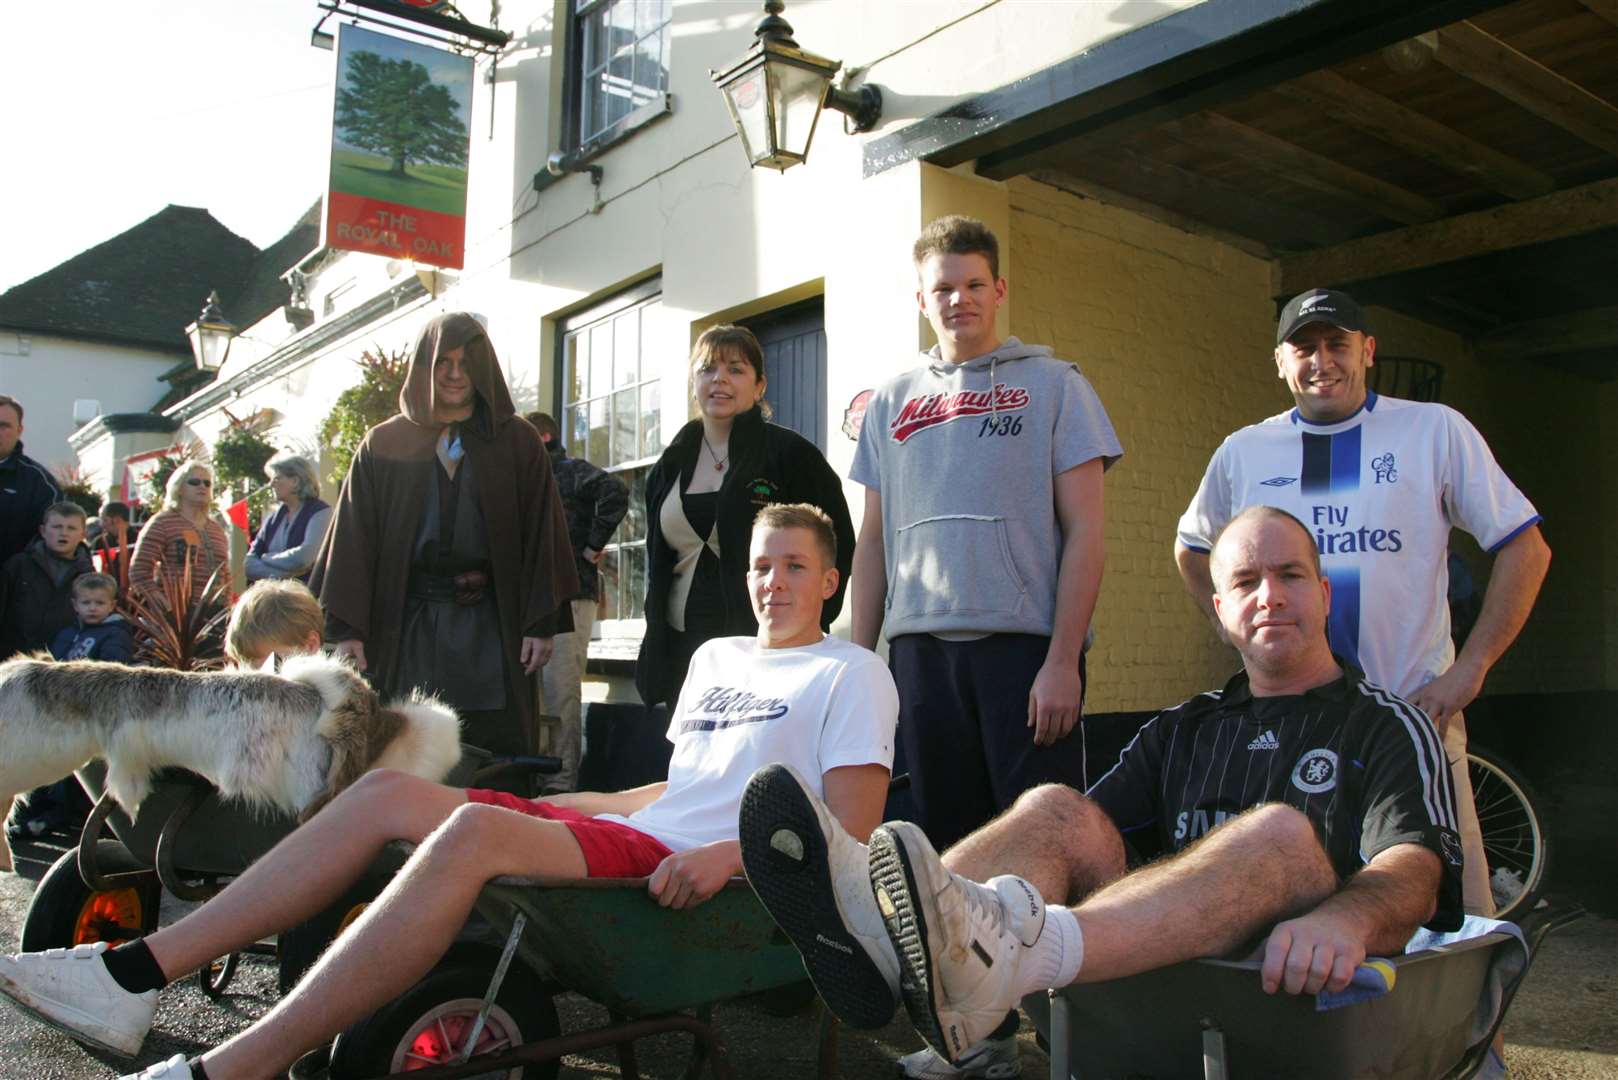 Landlady Michelle Barden with some of the racers taking part in the 2007 pram and wheelbarrow race in aid of the Pilgrims Hospice